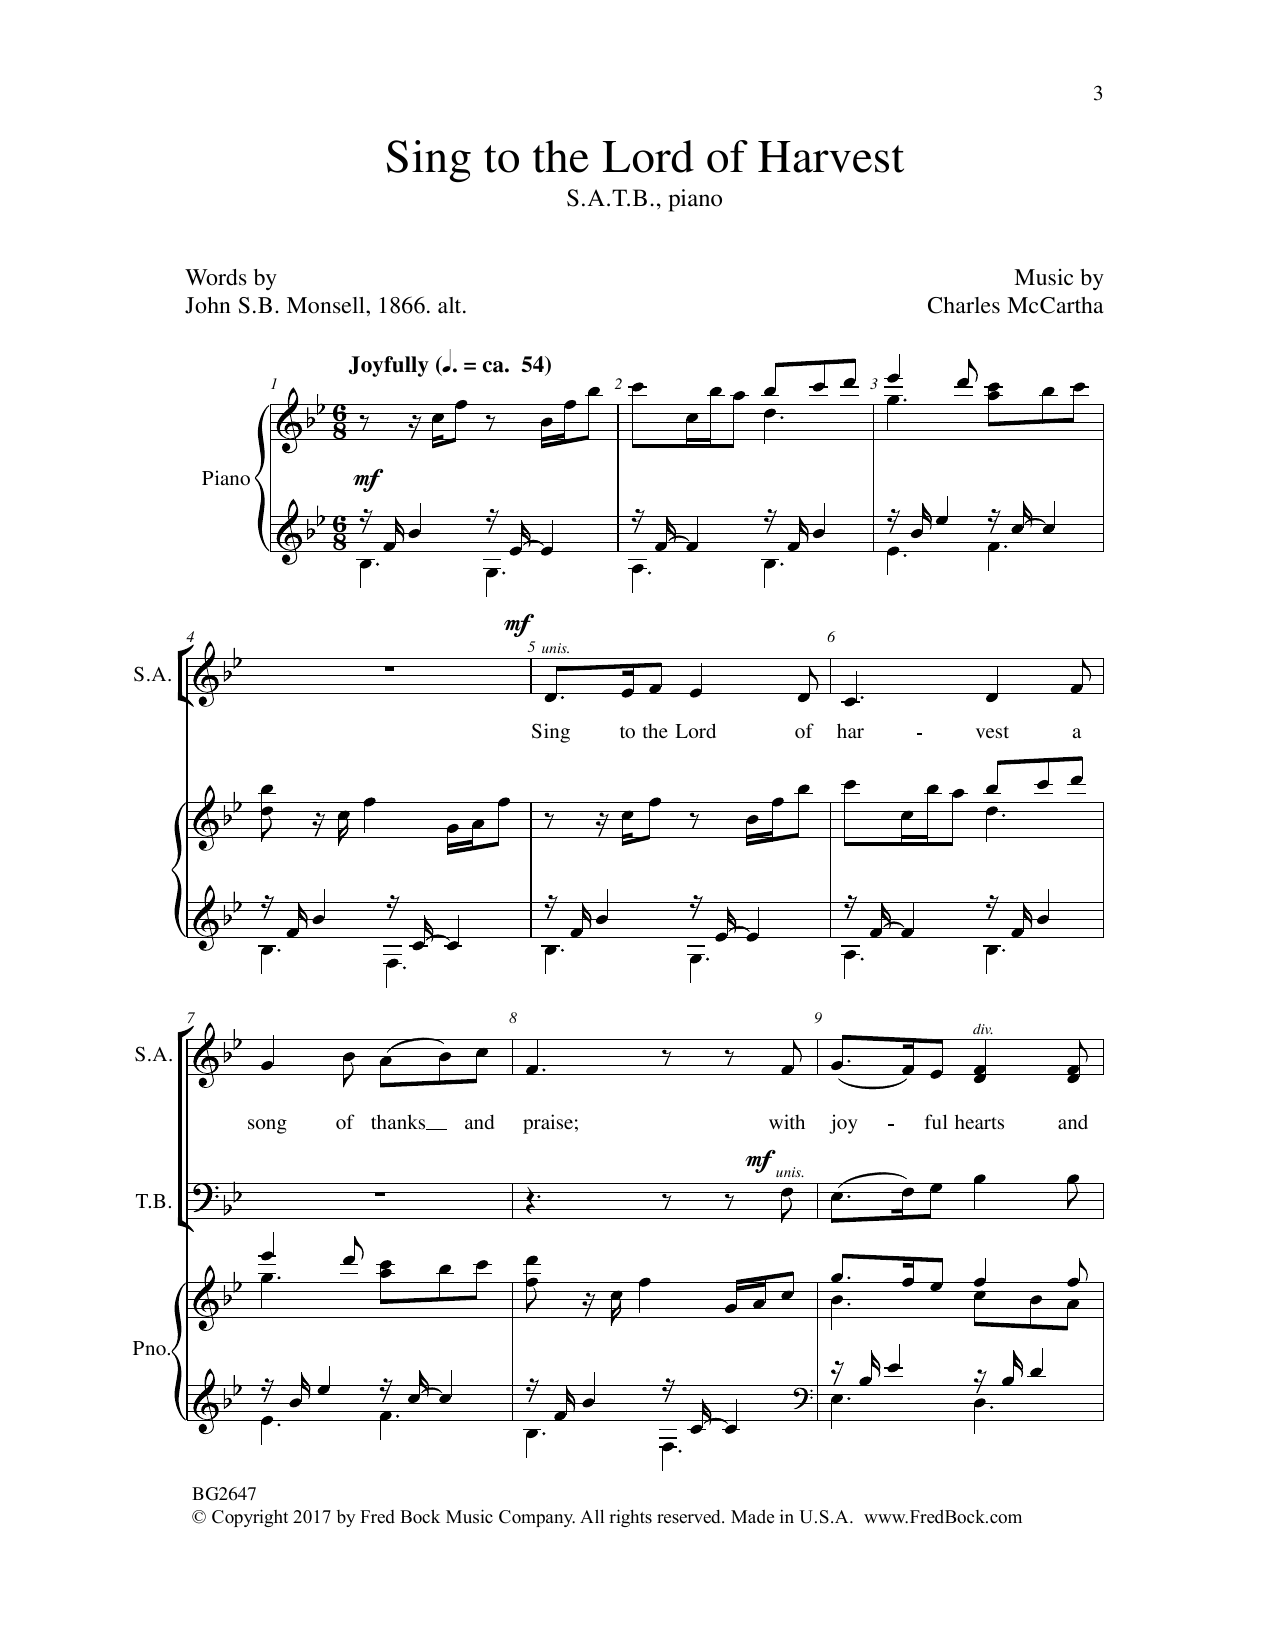 Download Charles McCartha Sing to the Lord of Harvest Sheet Music